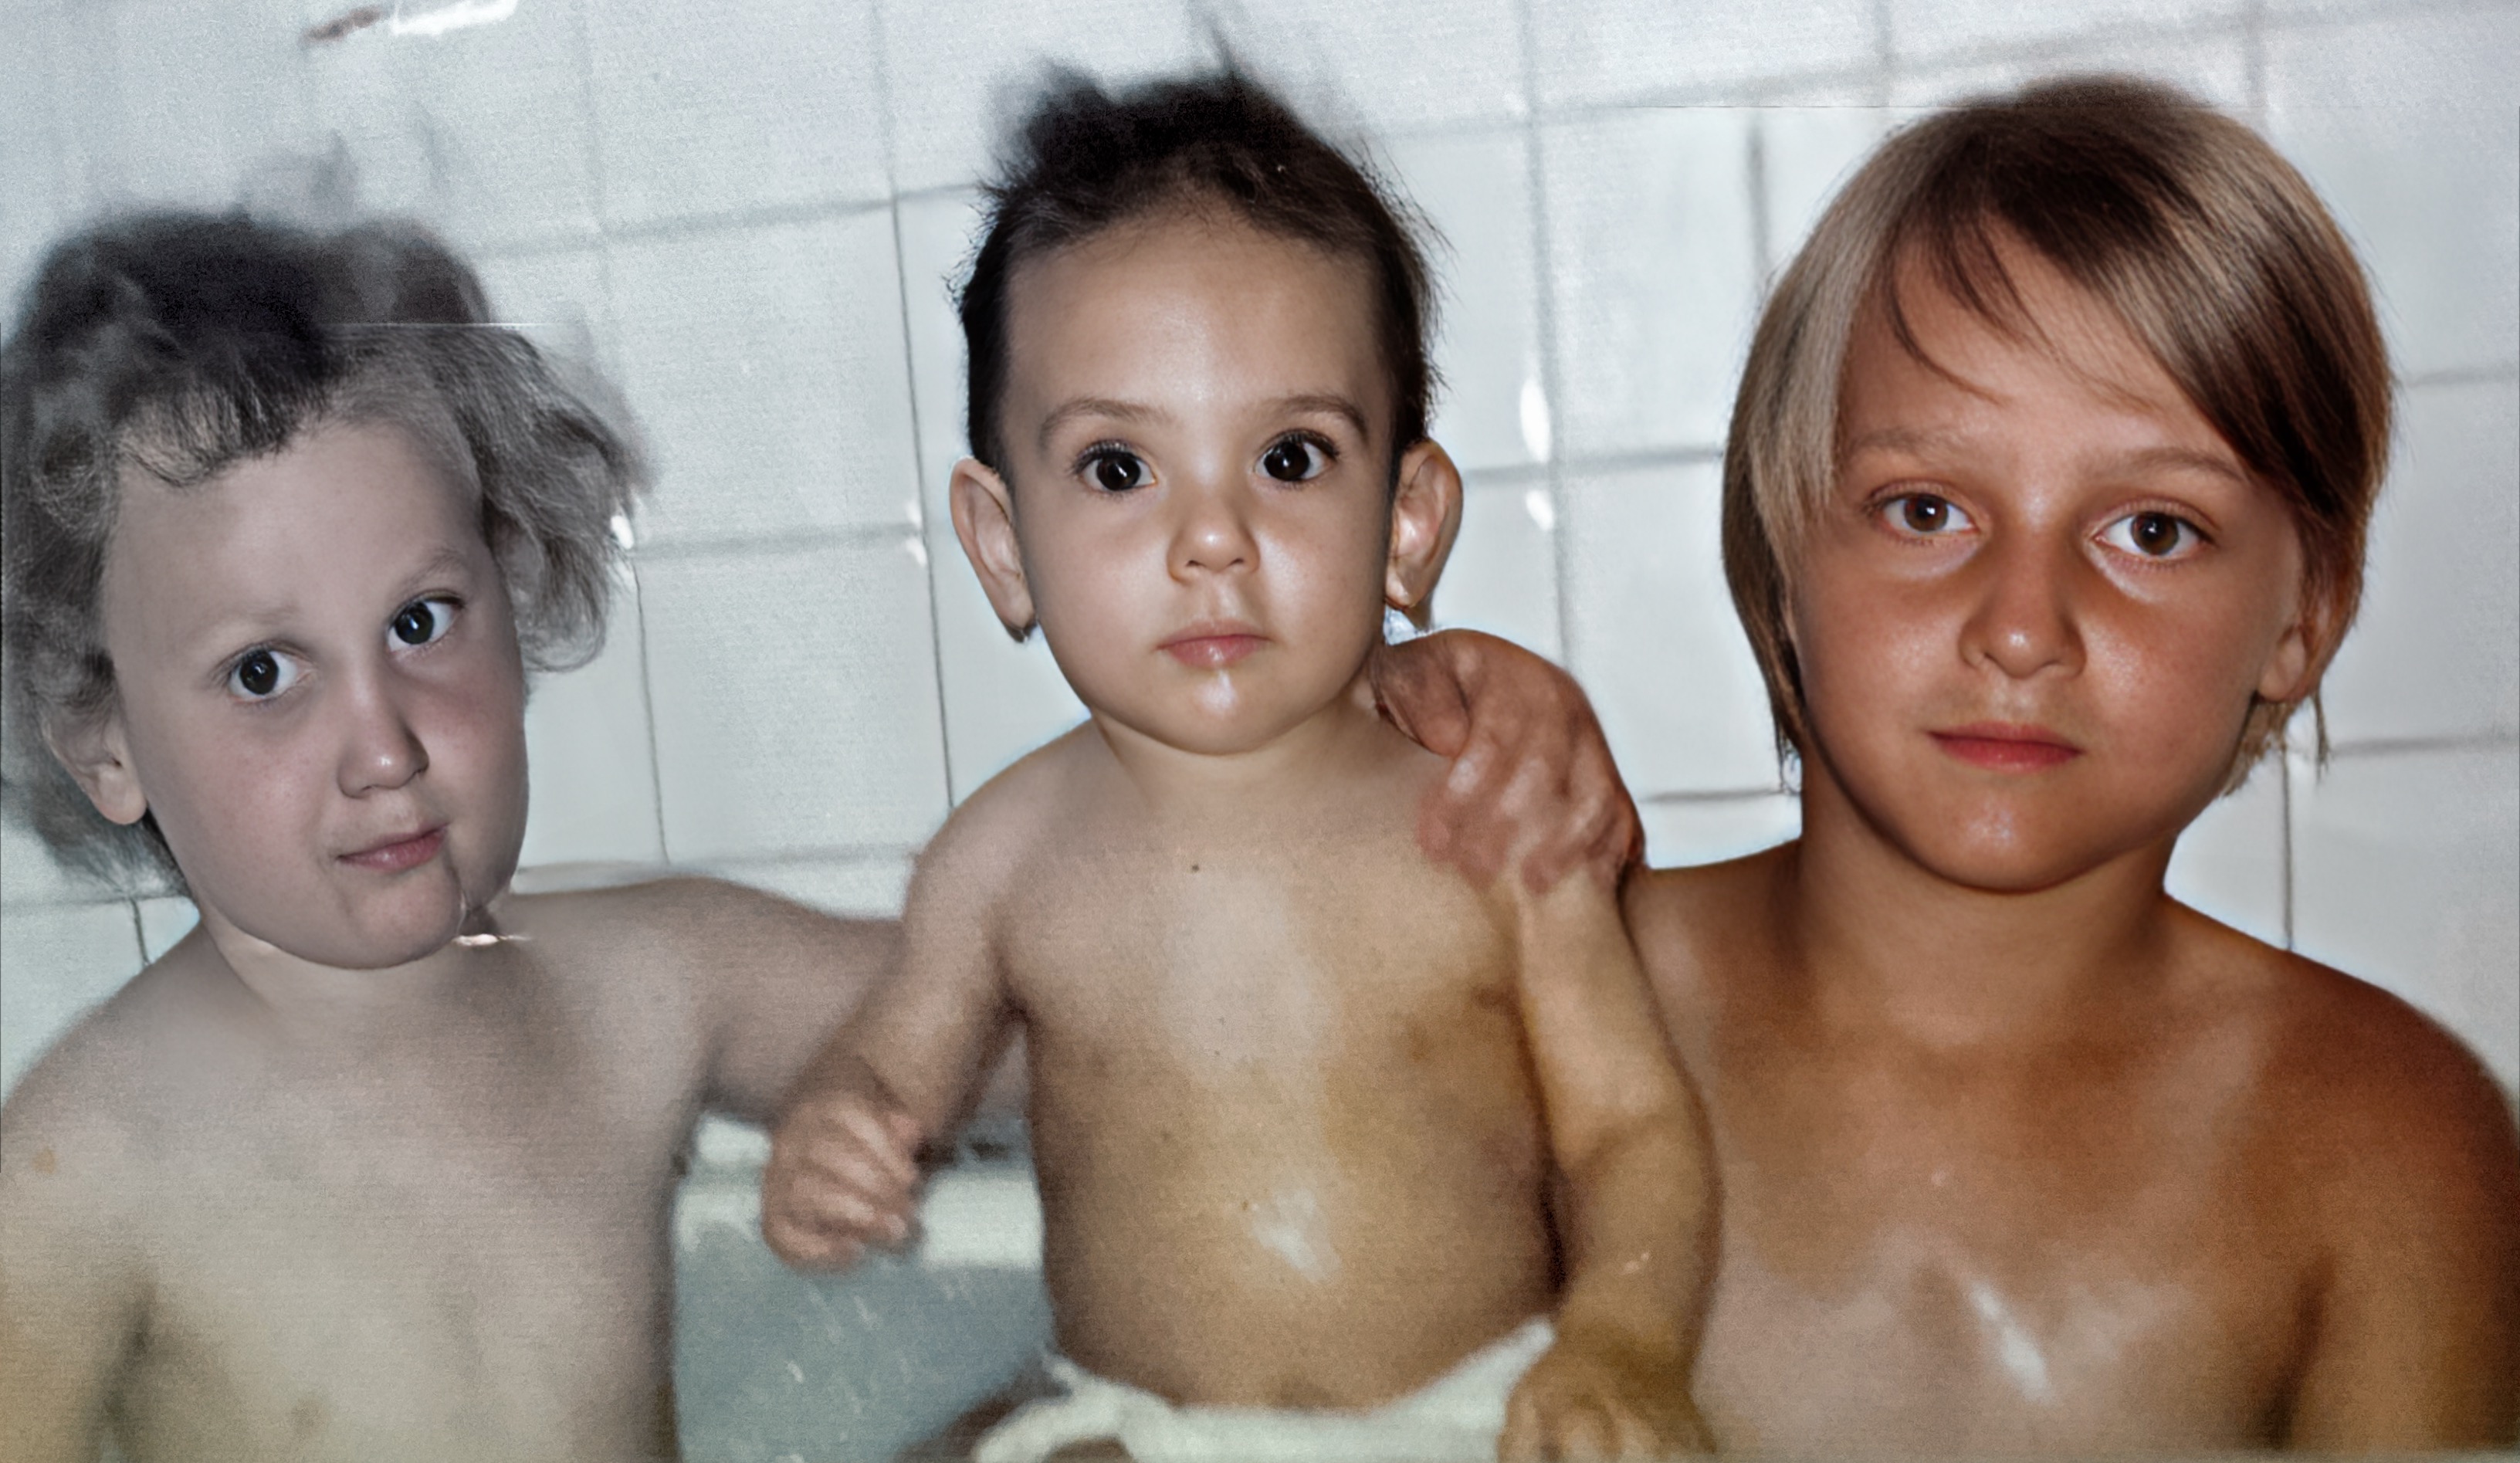 Summer of 1974. Last picture of all three boys together and happy. Ben was diagnosed with leukemia that fall.